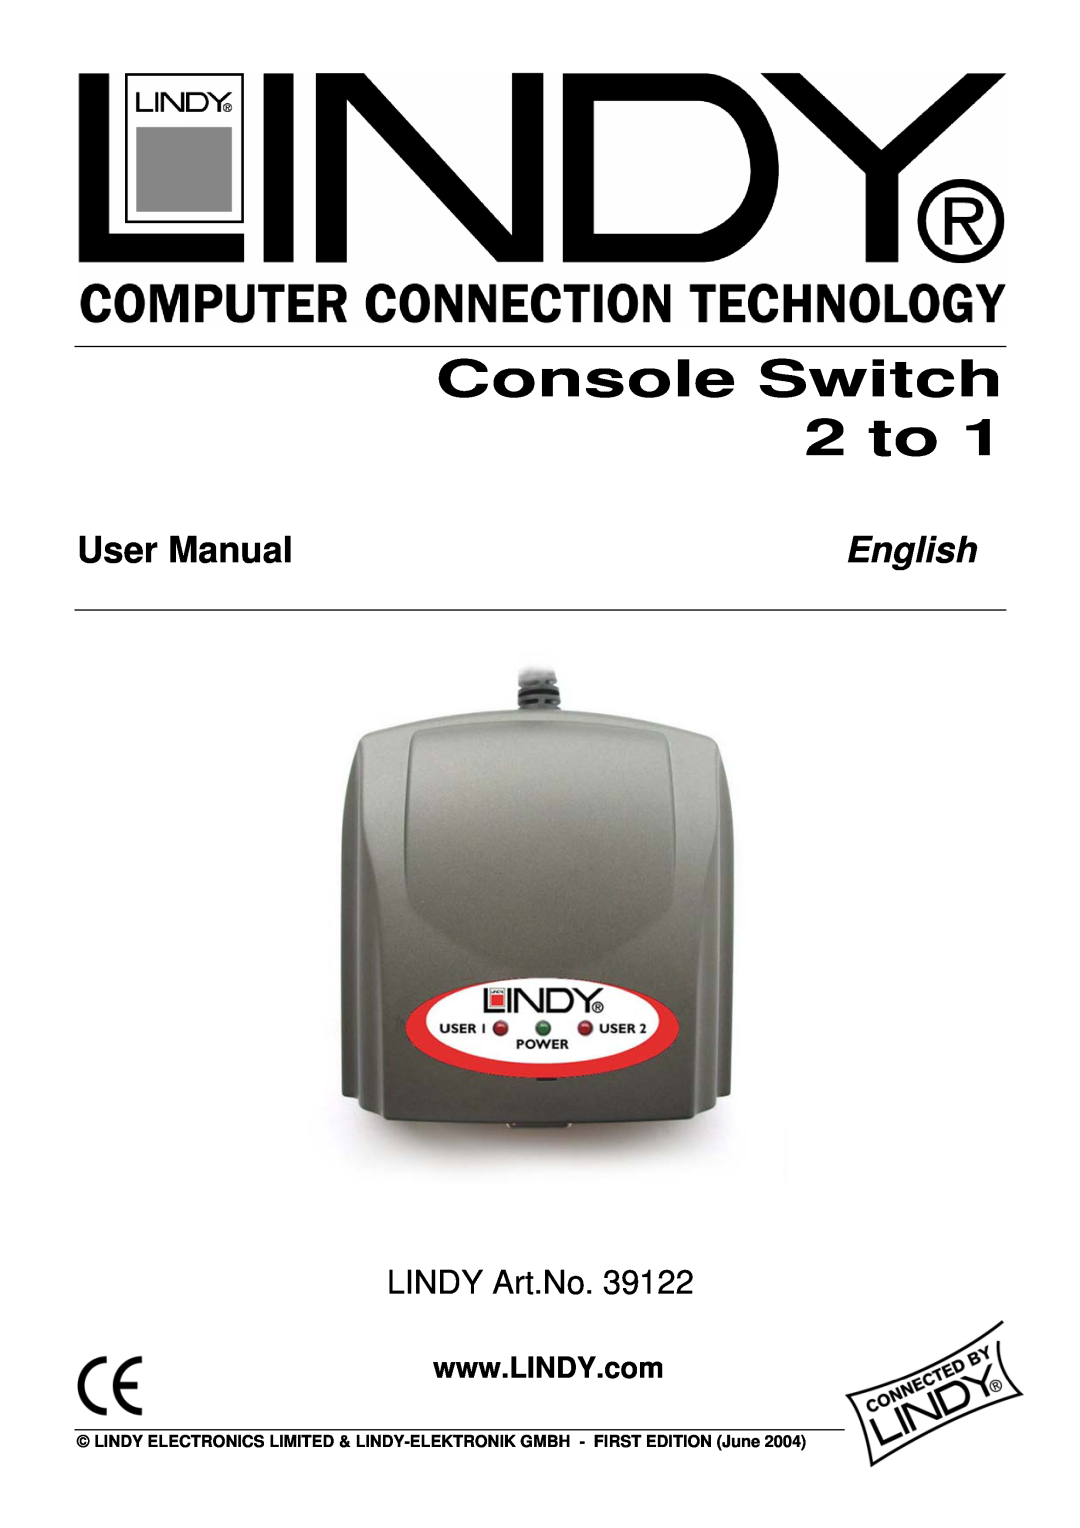 Lindy 39122 user manual Console Switch 2 to, User Manual, English, LINDY Art.No 